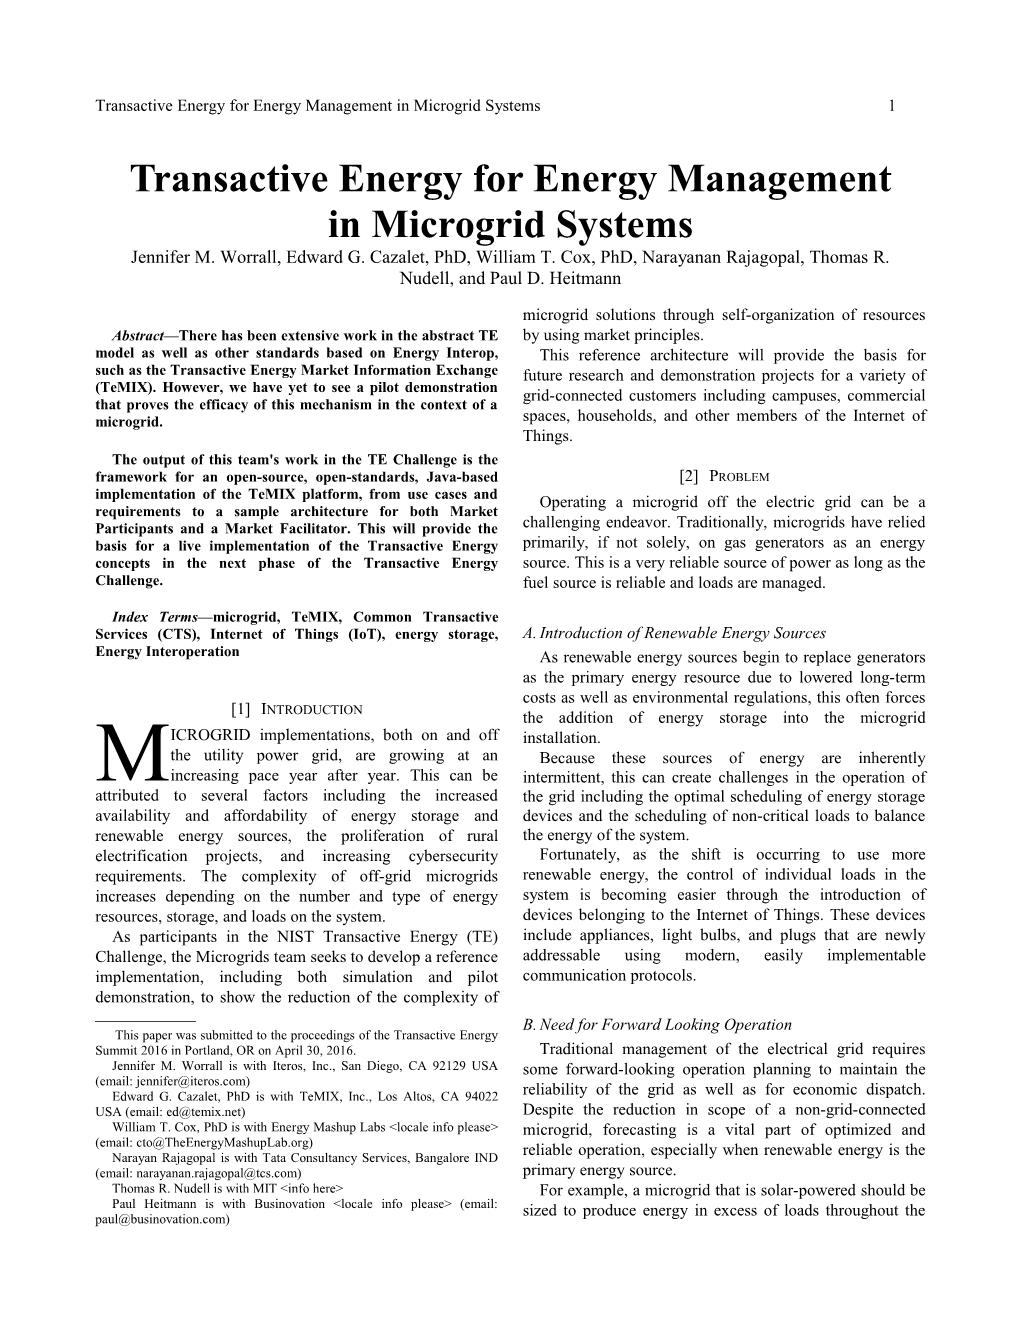 Transactive Energy for Energy Management in Microgrid Systems